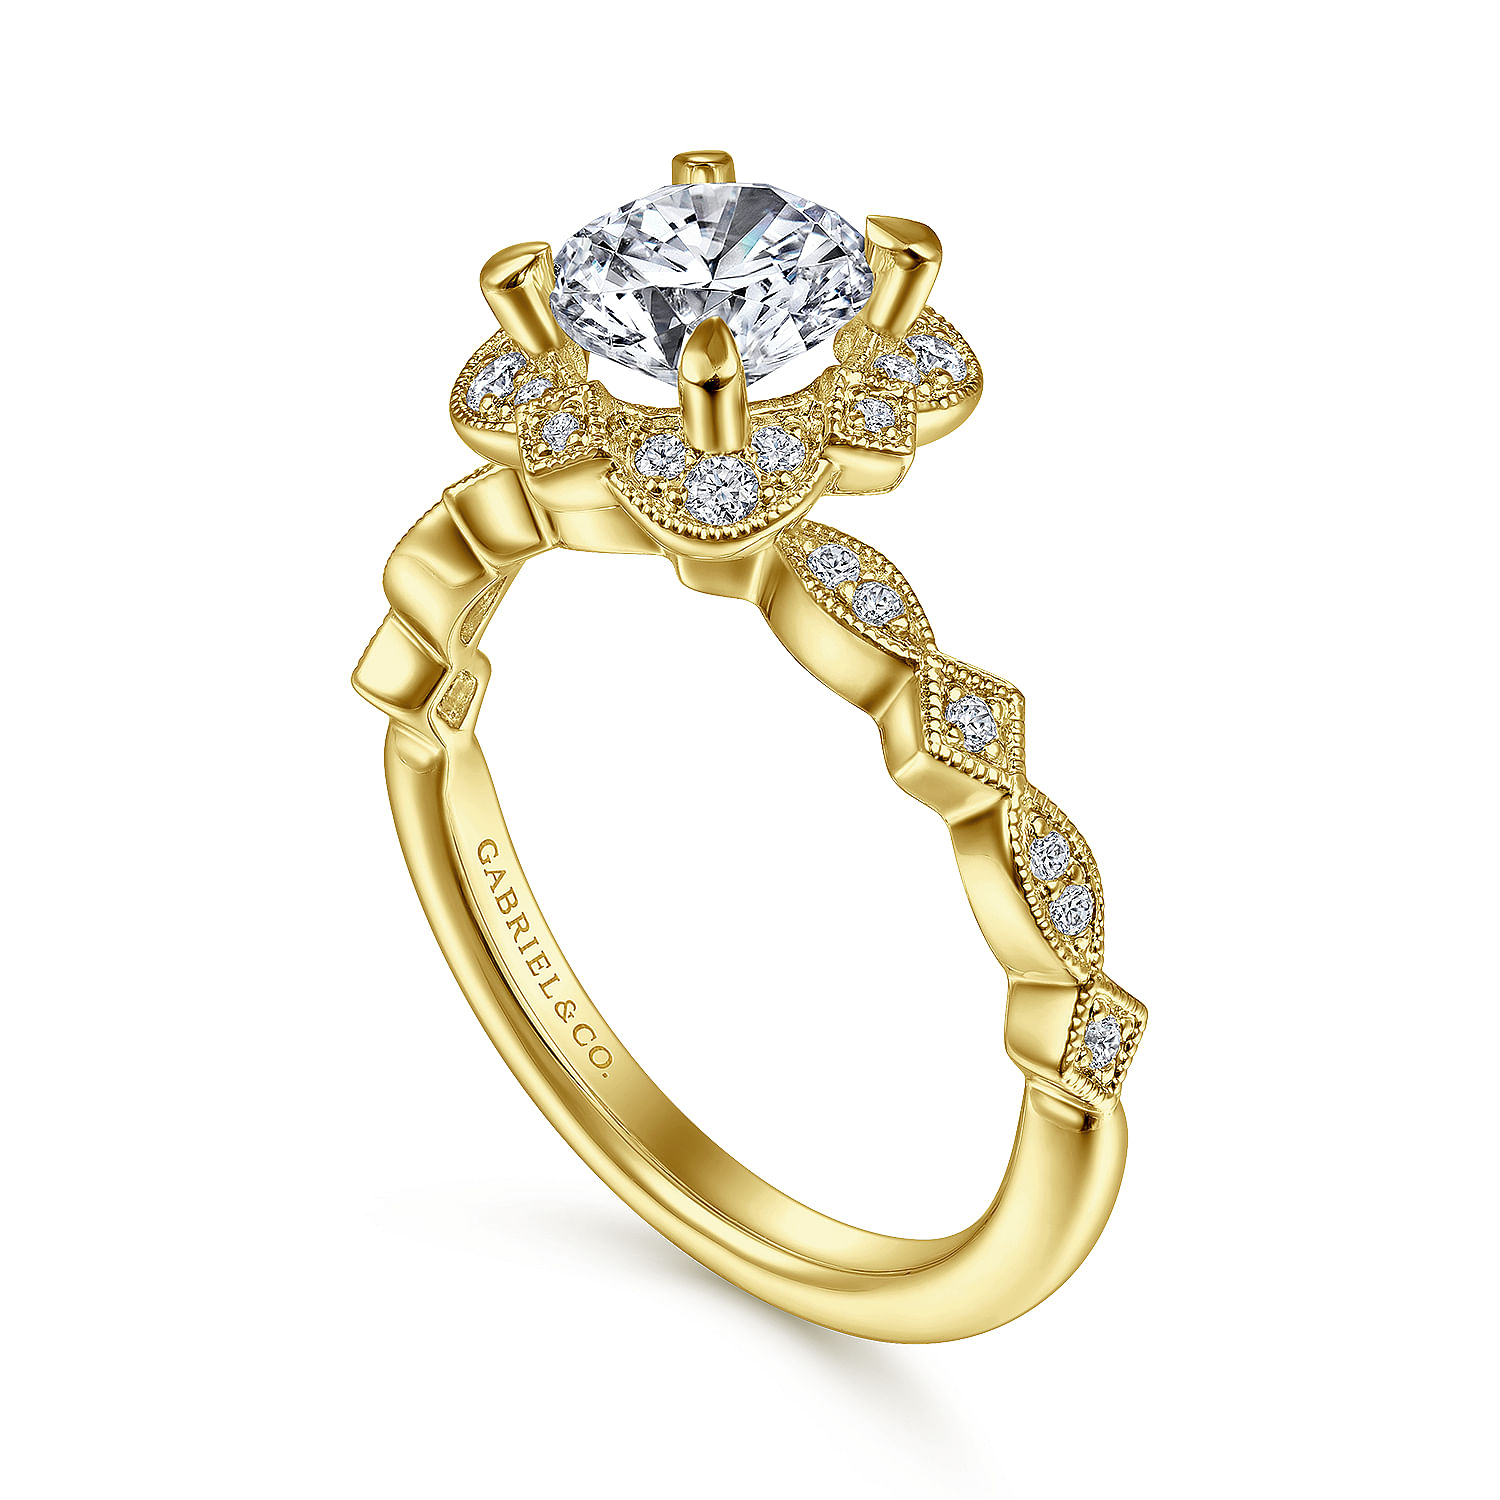 Vintage Inspired 14K Yellow Gold Fancy Halo Round Diamond Engagement Ring